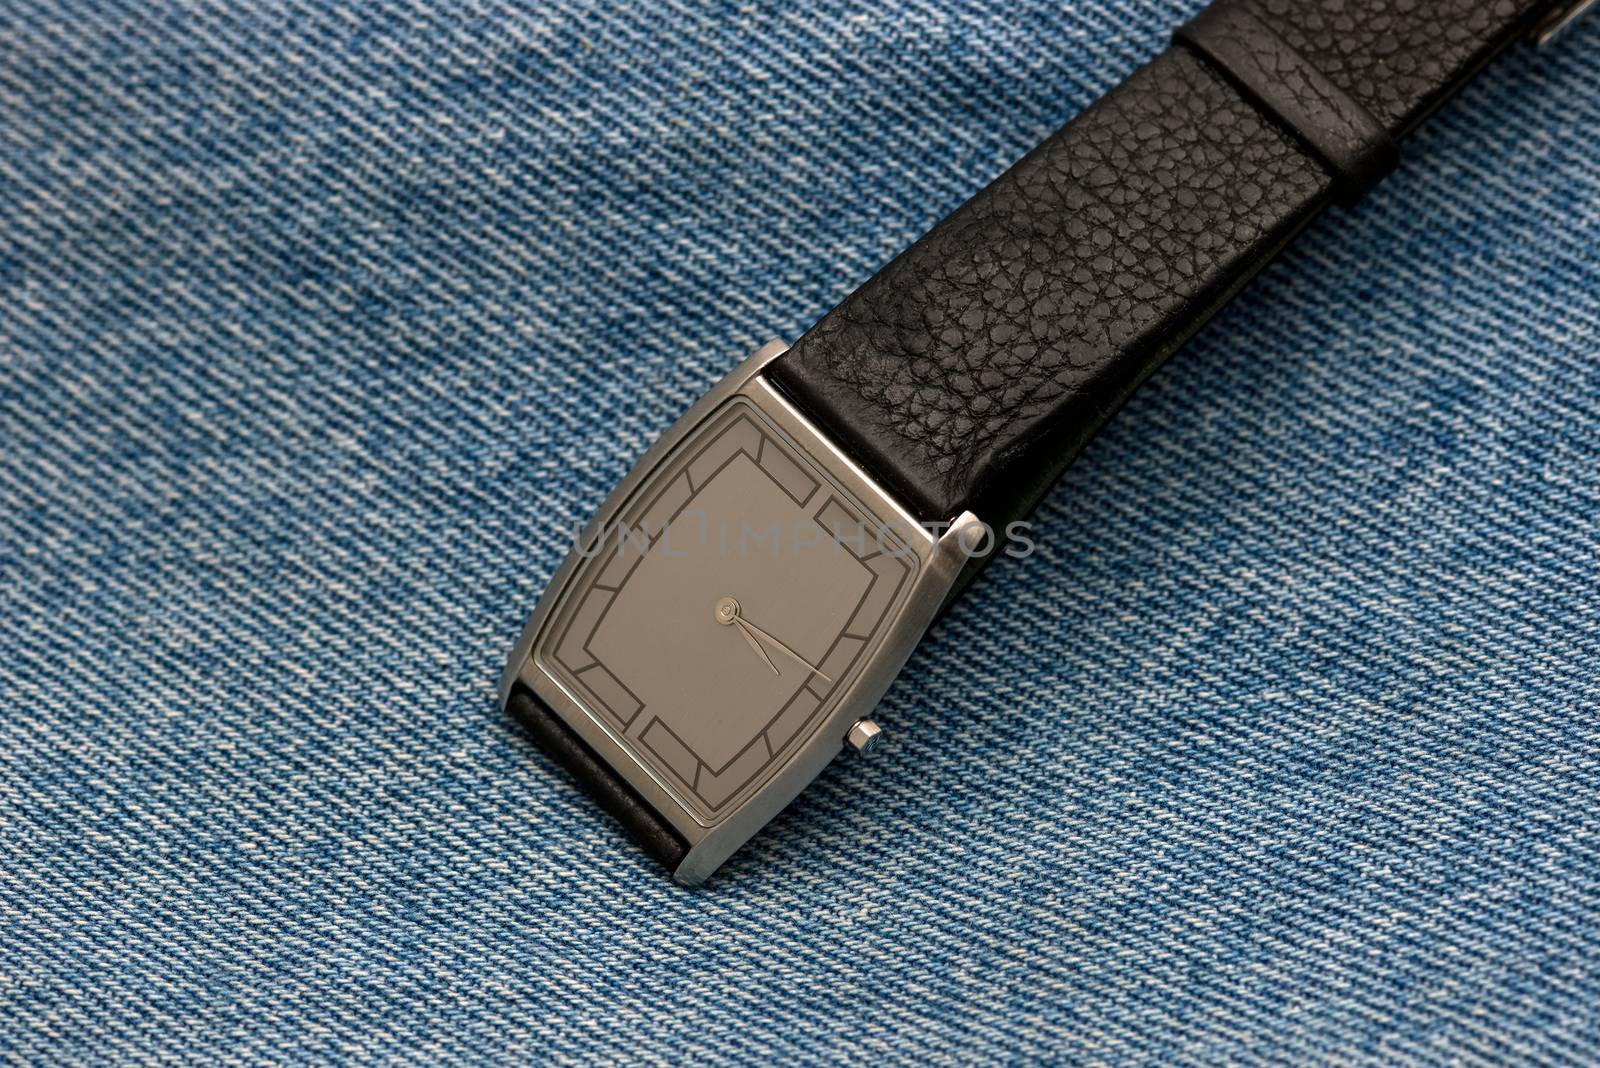 wrist watch on a background made from close up of texture in jeans